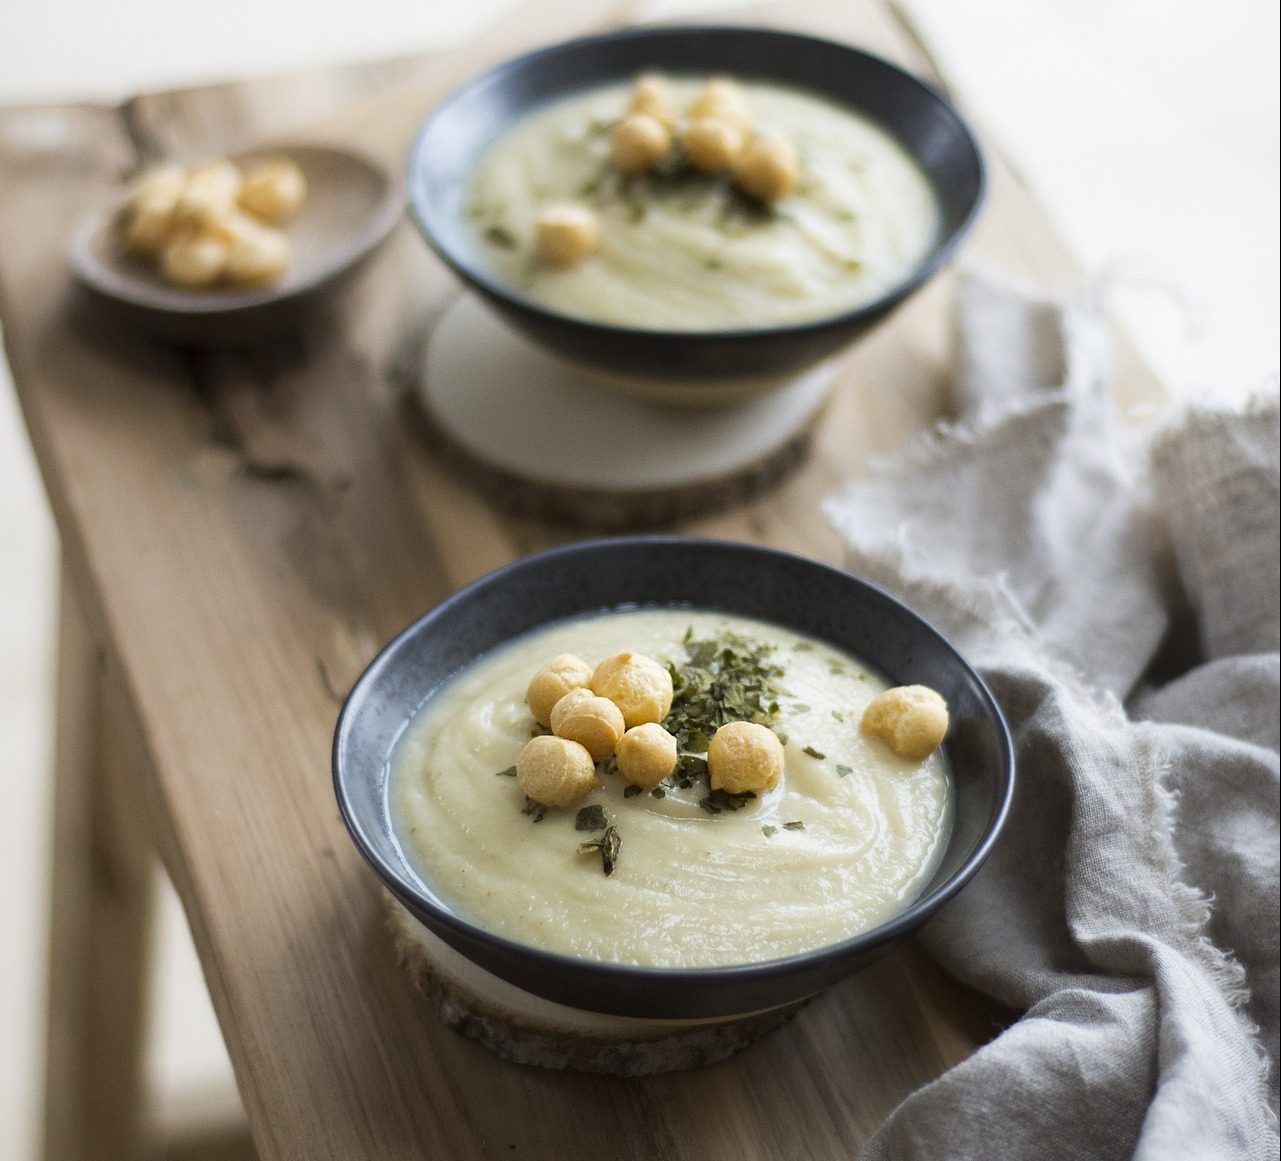 [RECIPE] This healthy cauliflower soup is good for your gut too